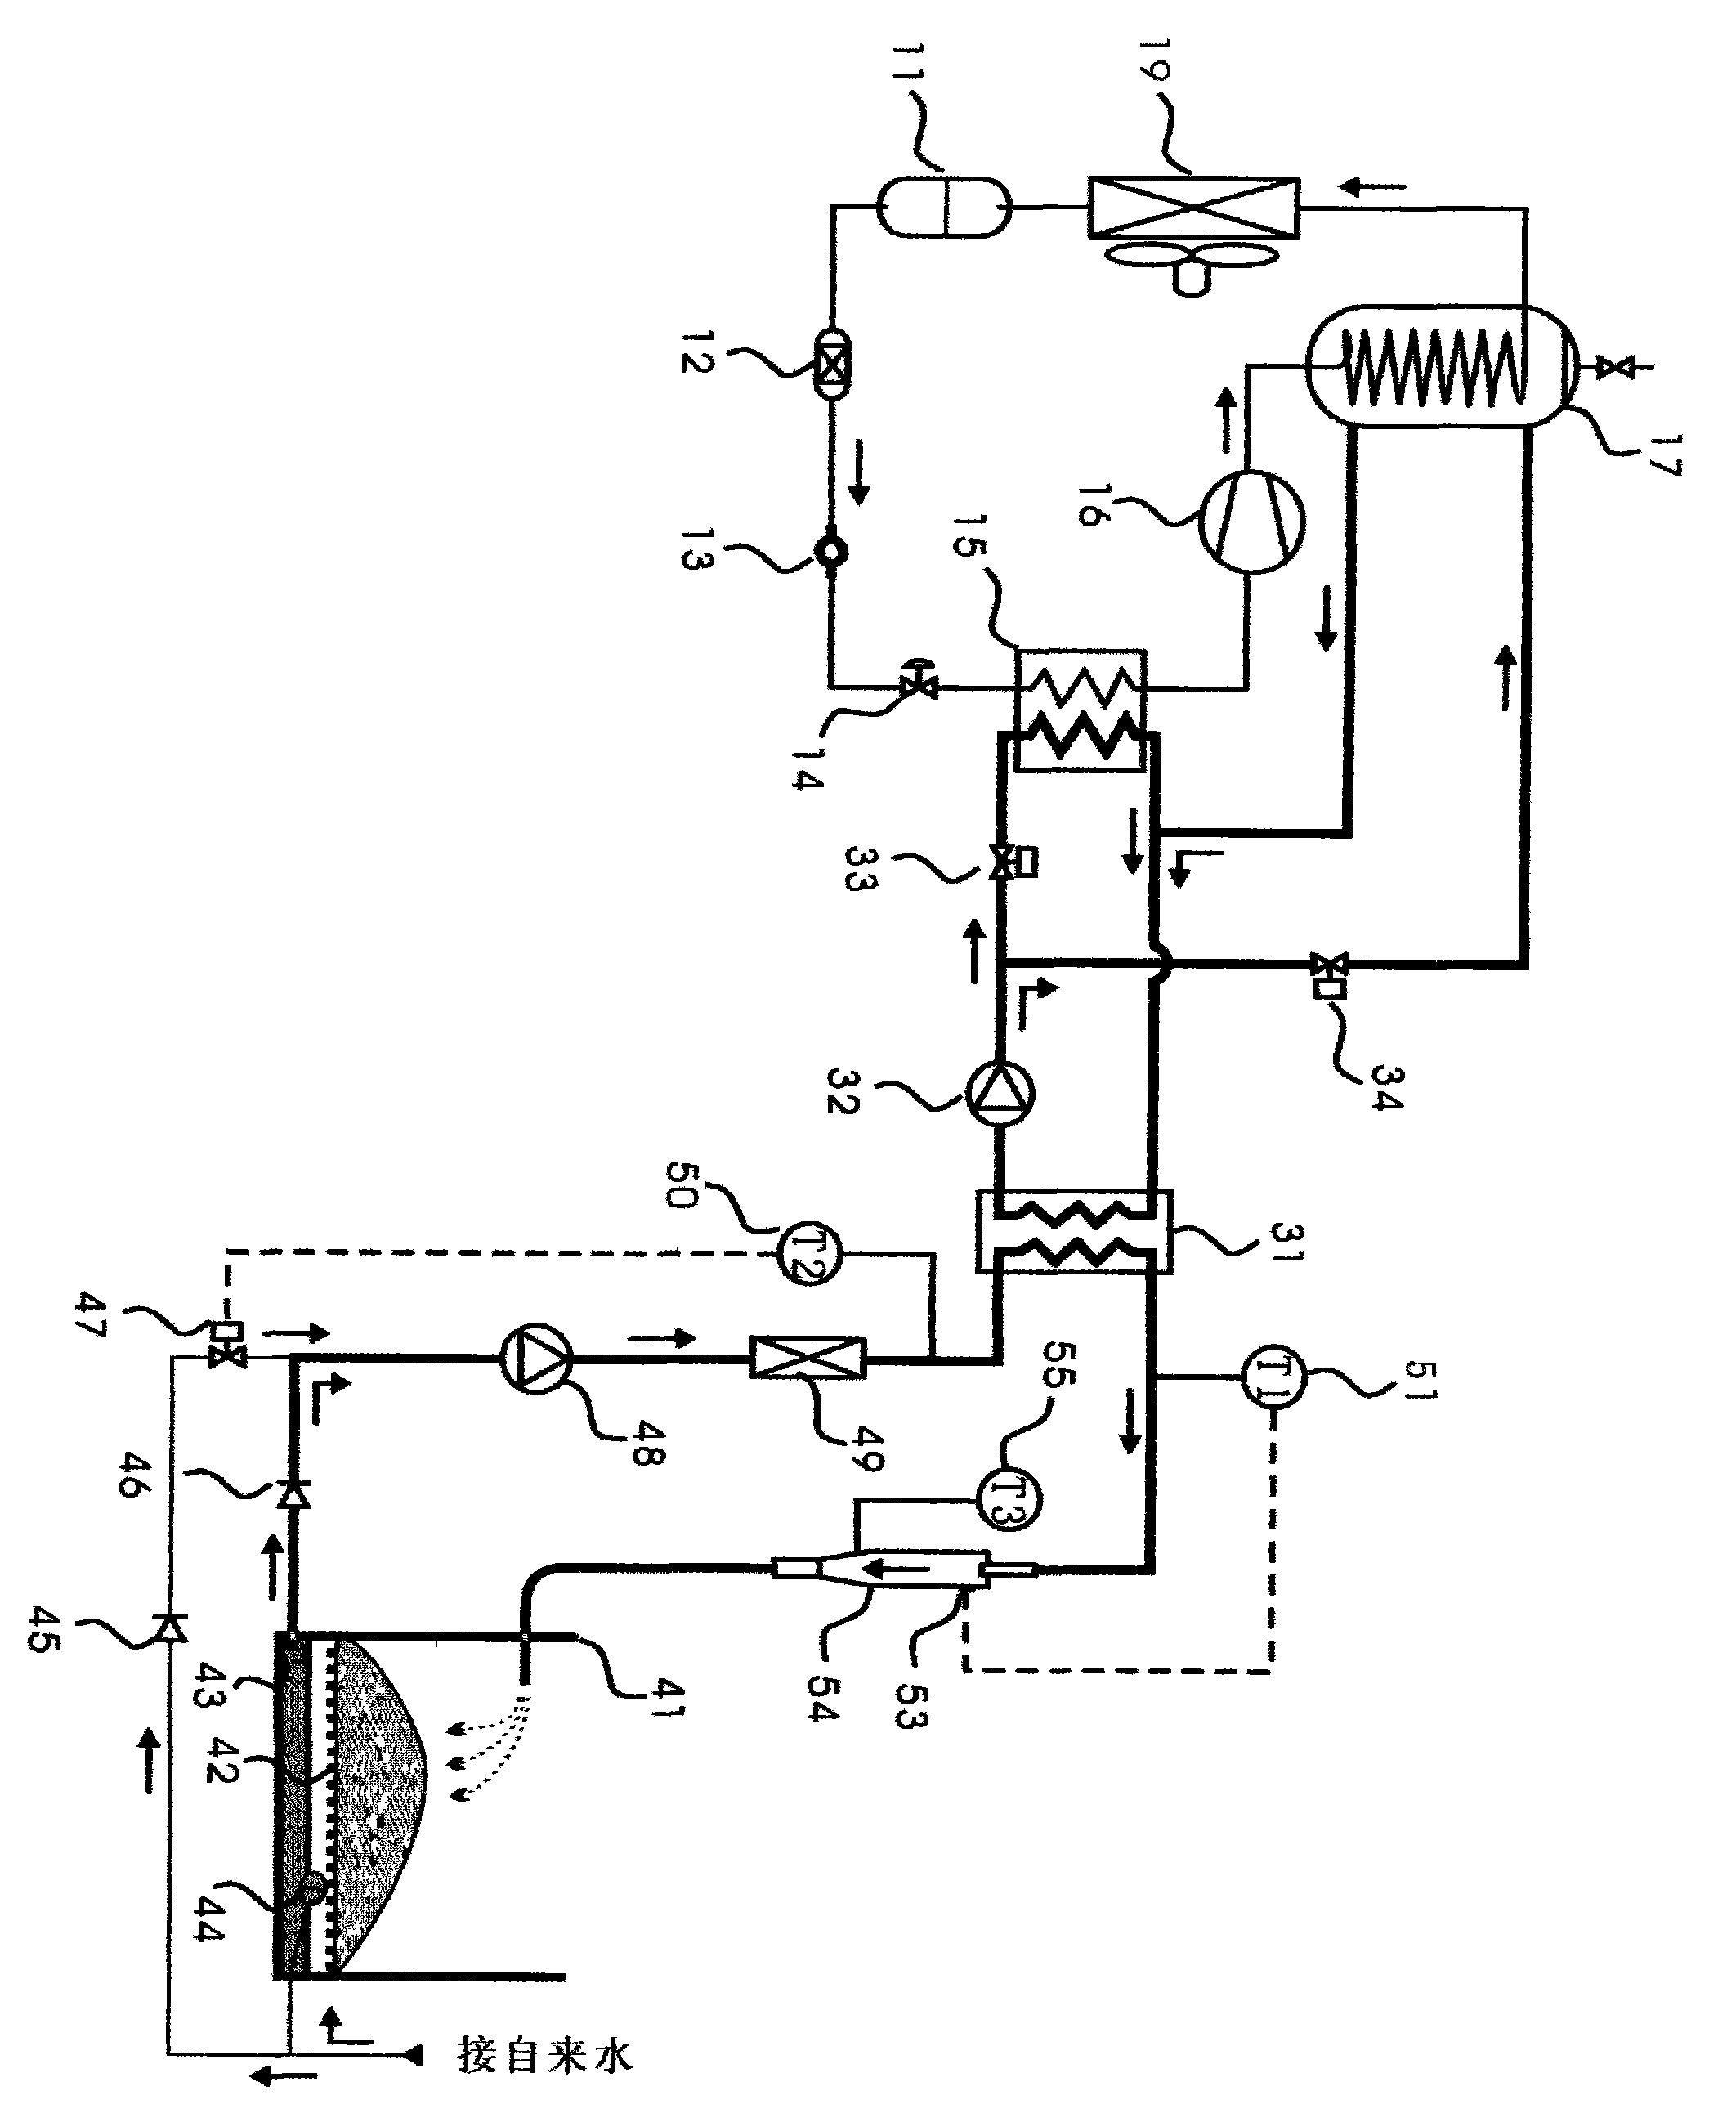 Novel method and device for producing ice